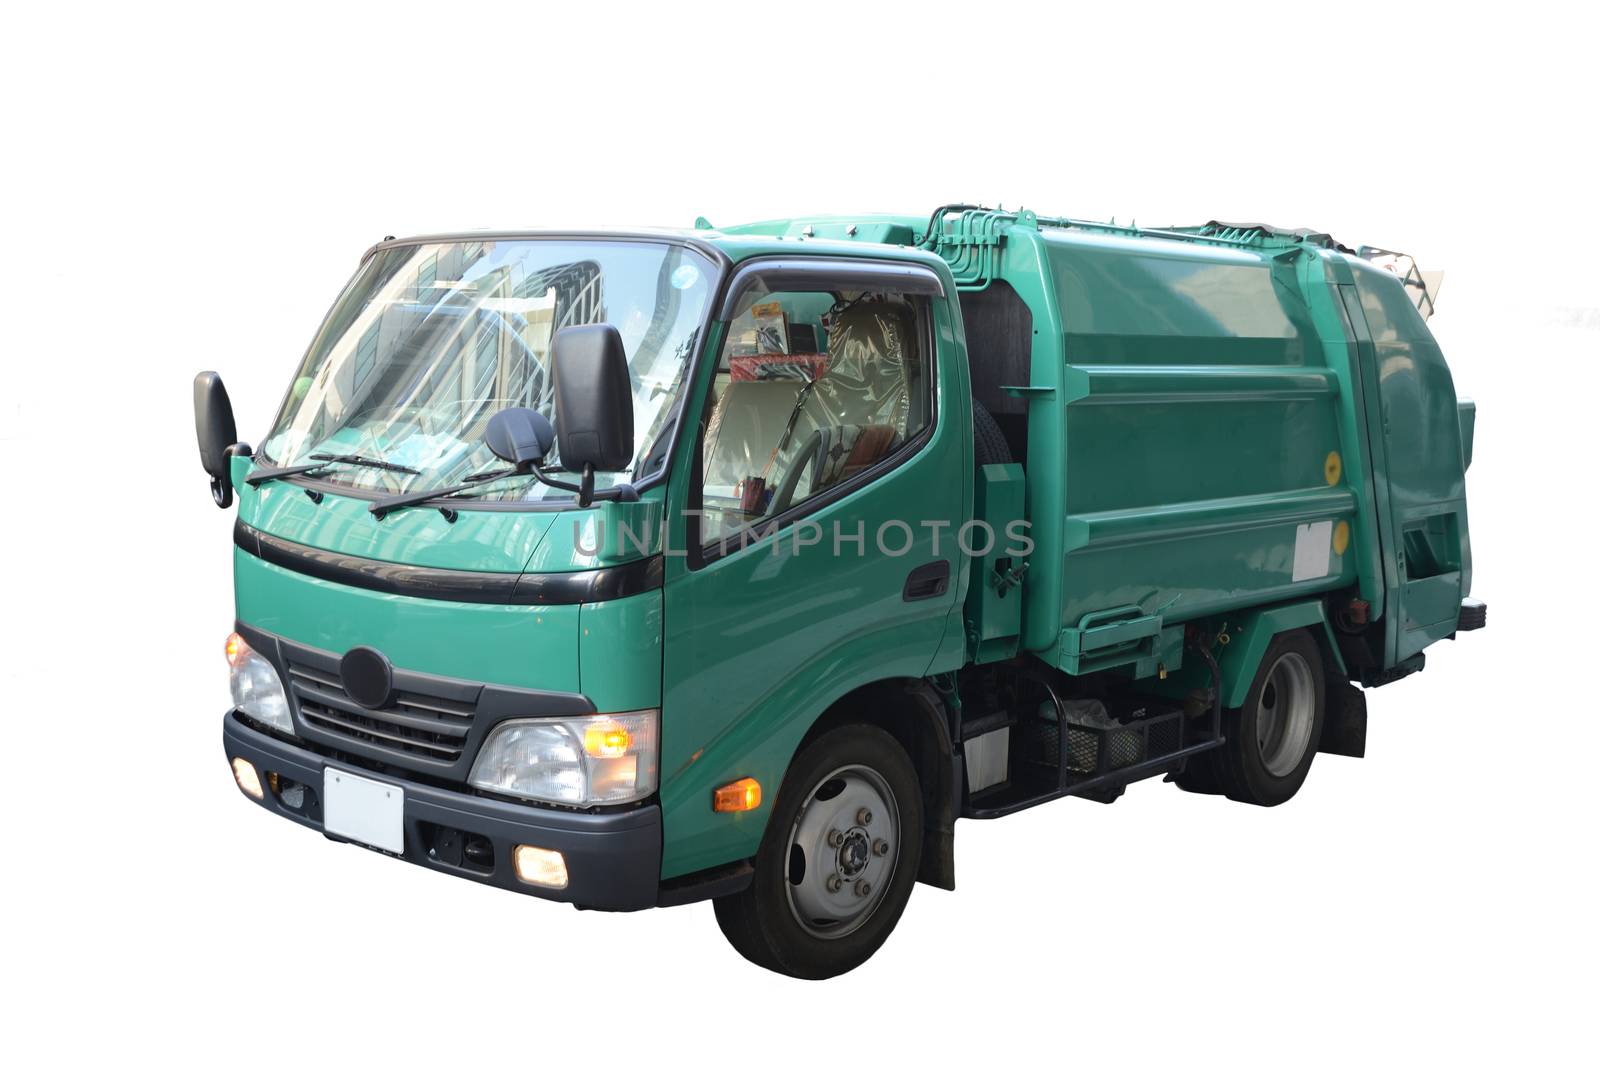 Small green garbage truck on white background.